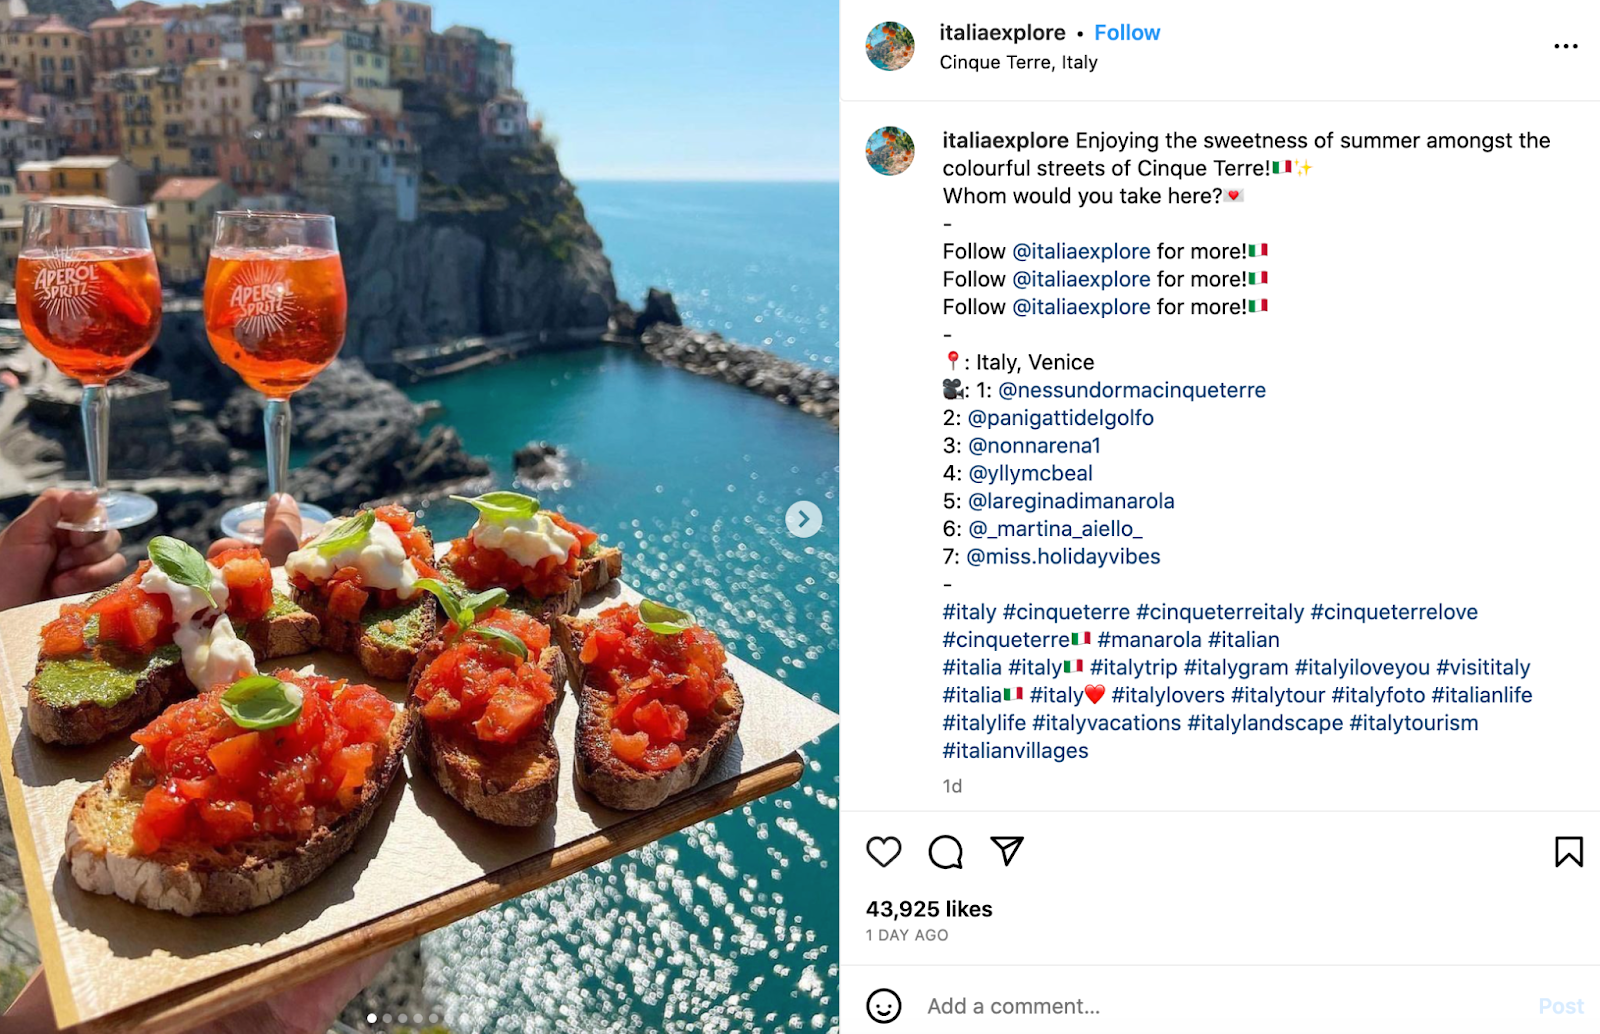 A screenshot of an Instagram post featuring a photo of sandwiches and drinks in Italy